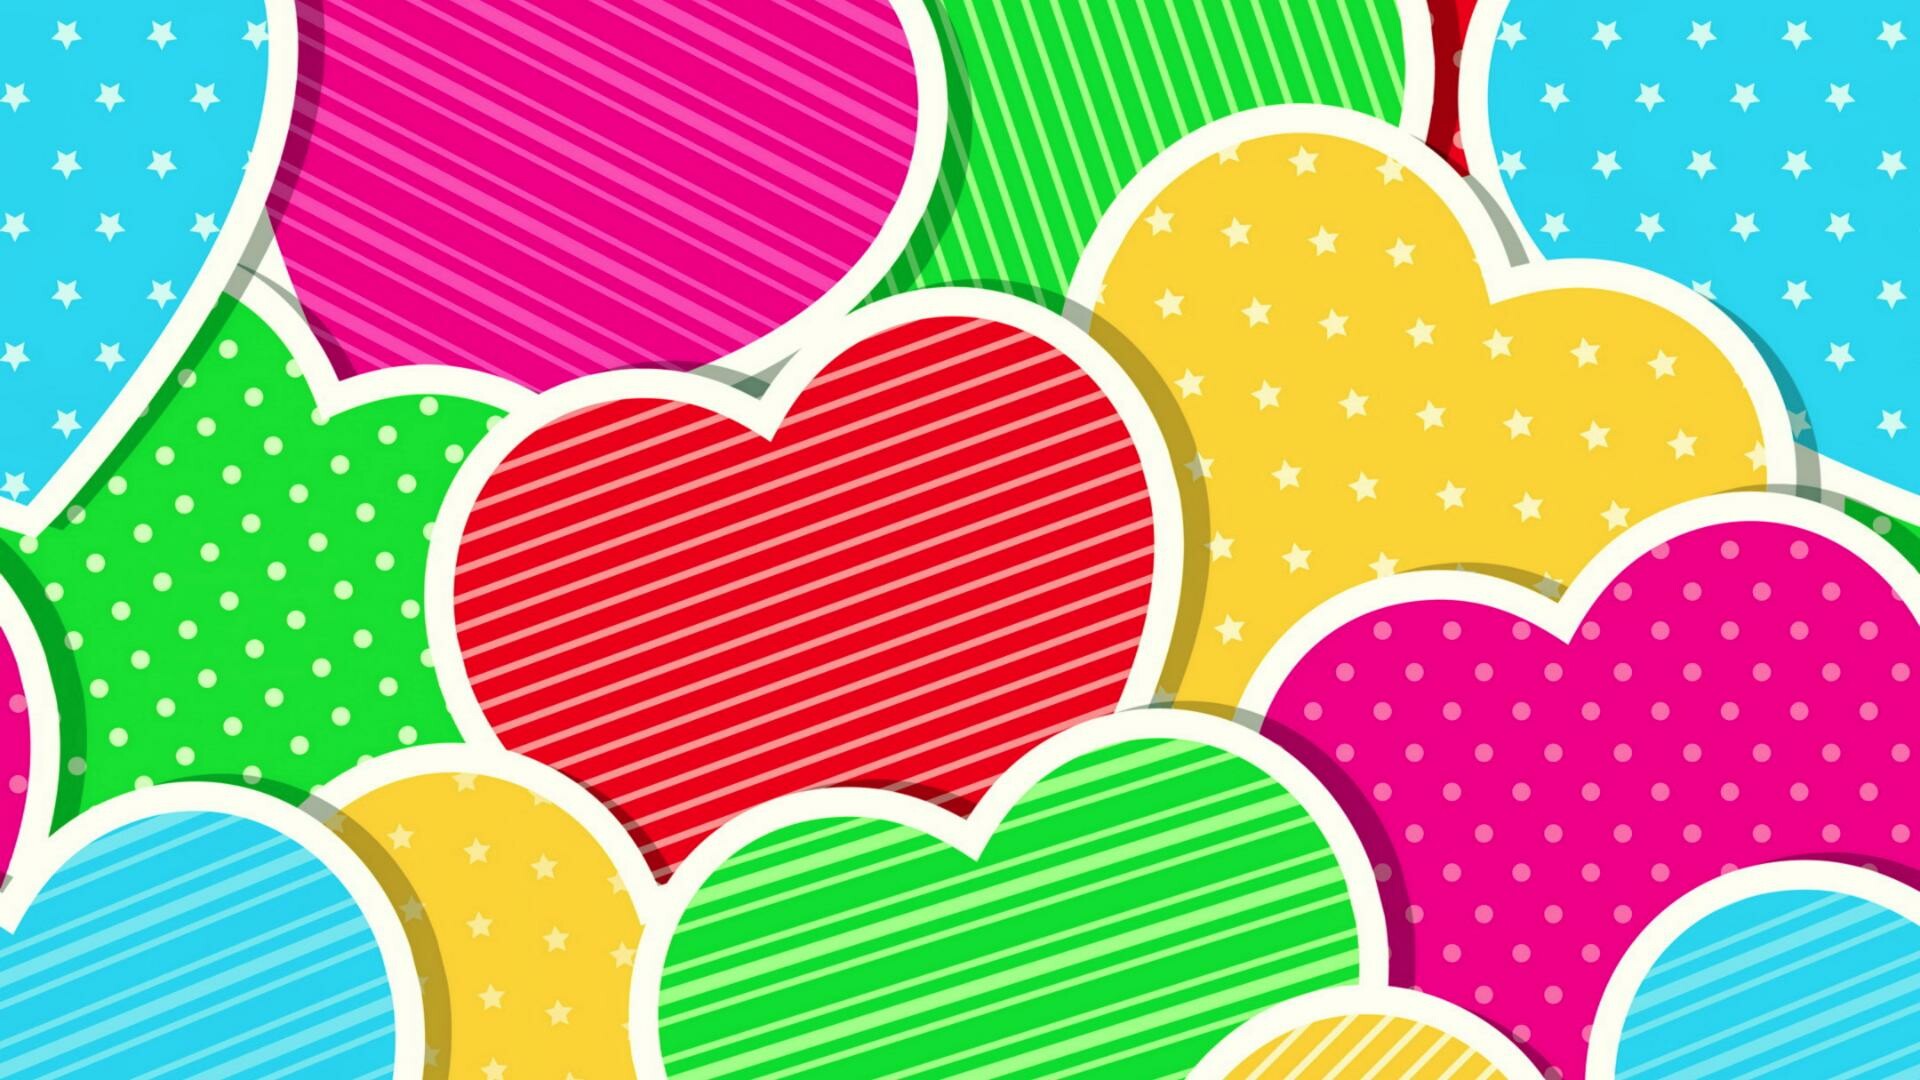 Heart: Colorful, Love card, Valentine's Day. 1920x1080 Full HD Wallpaper.